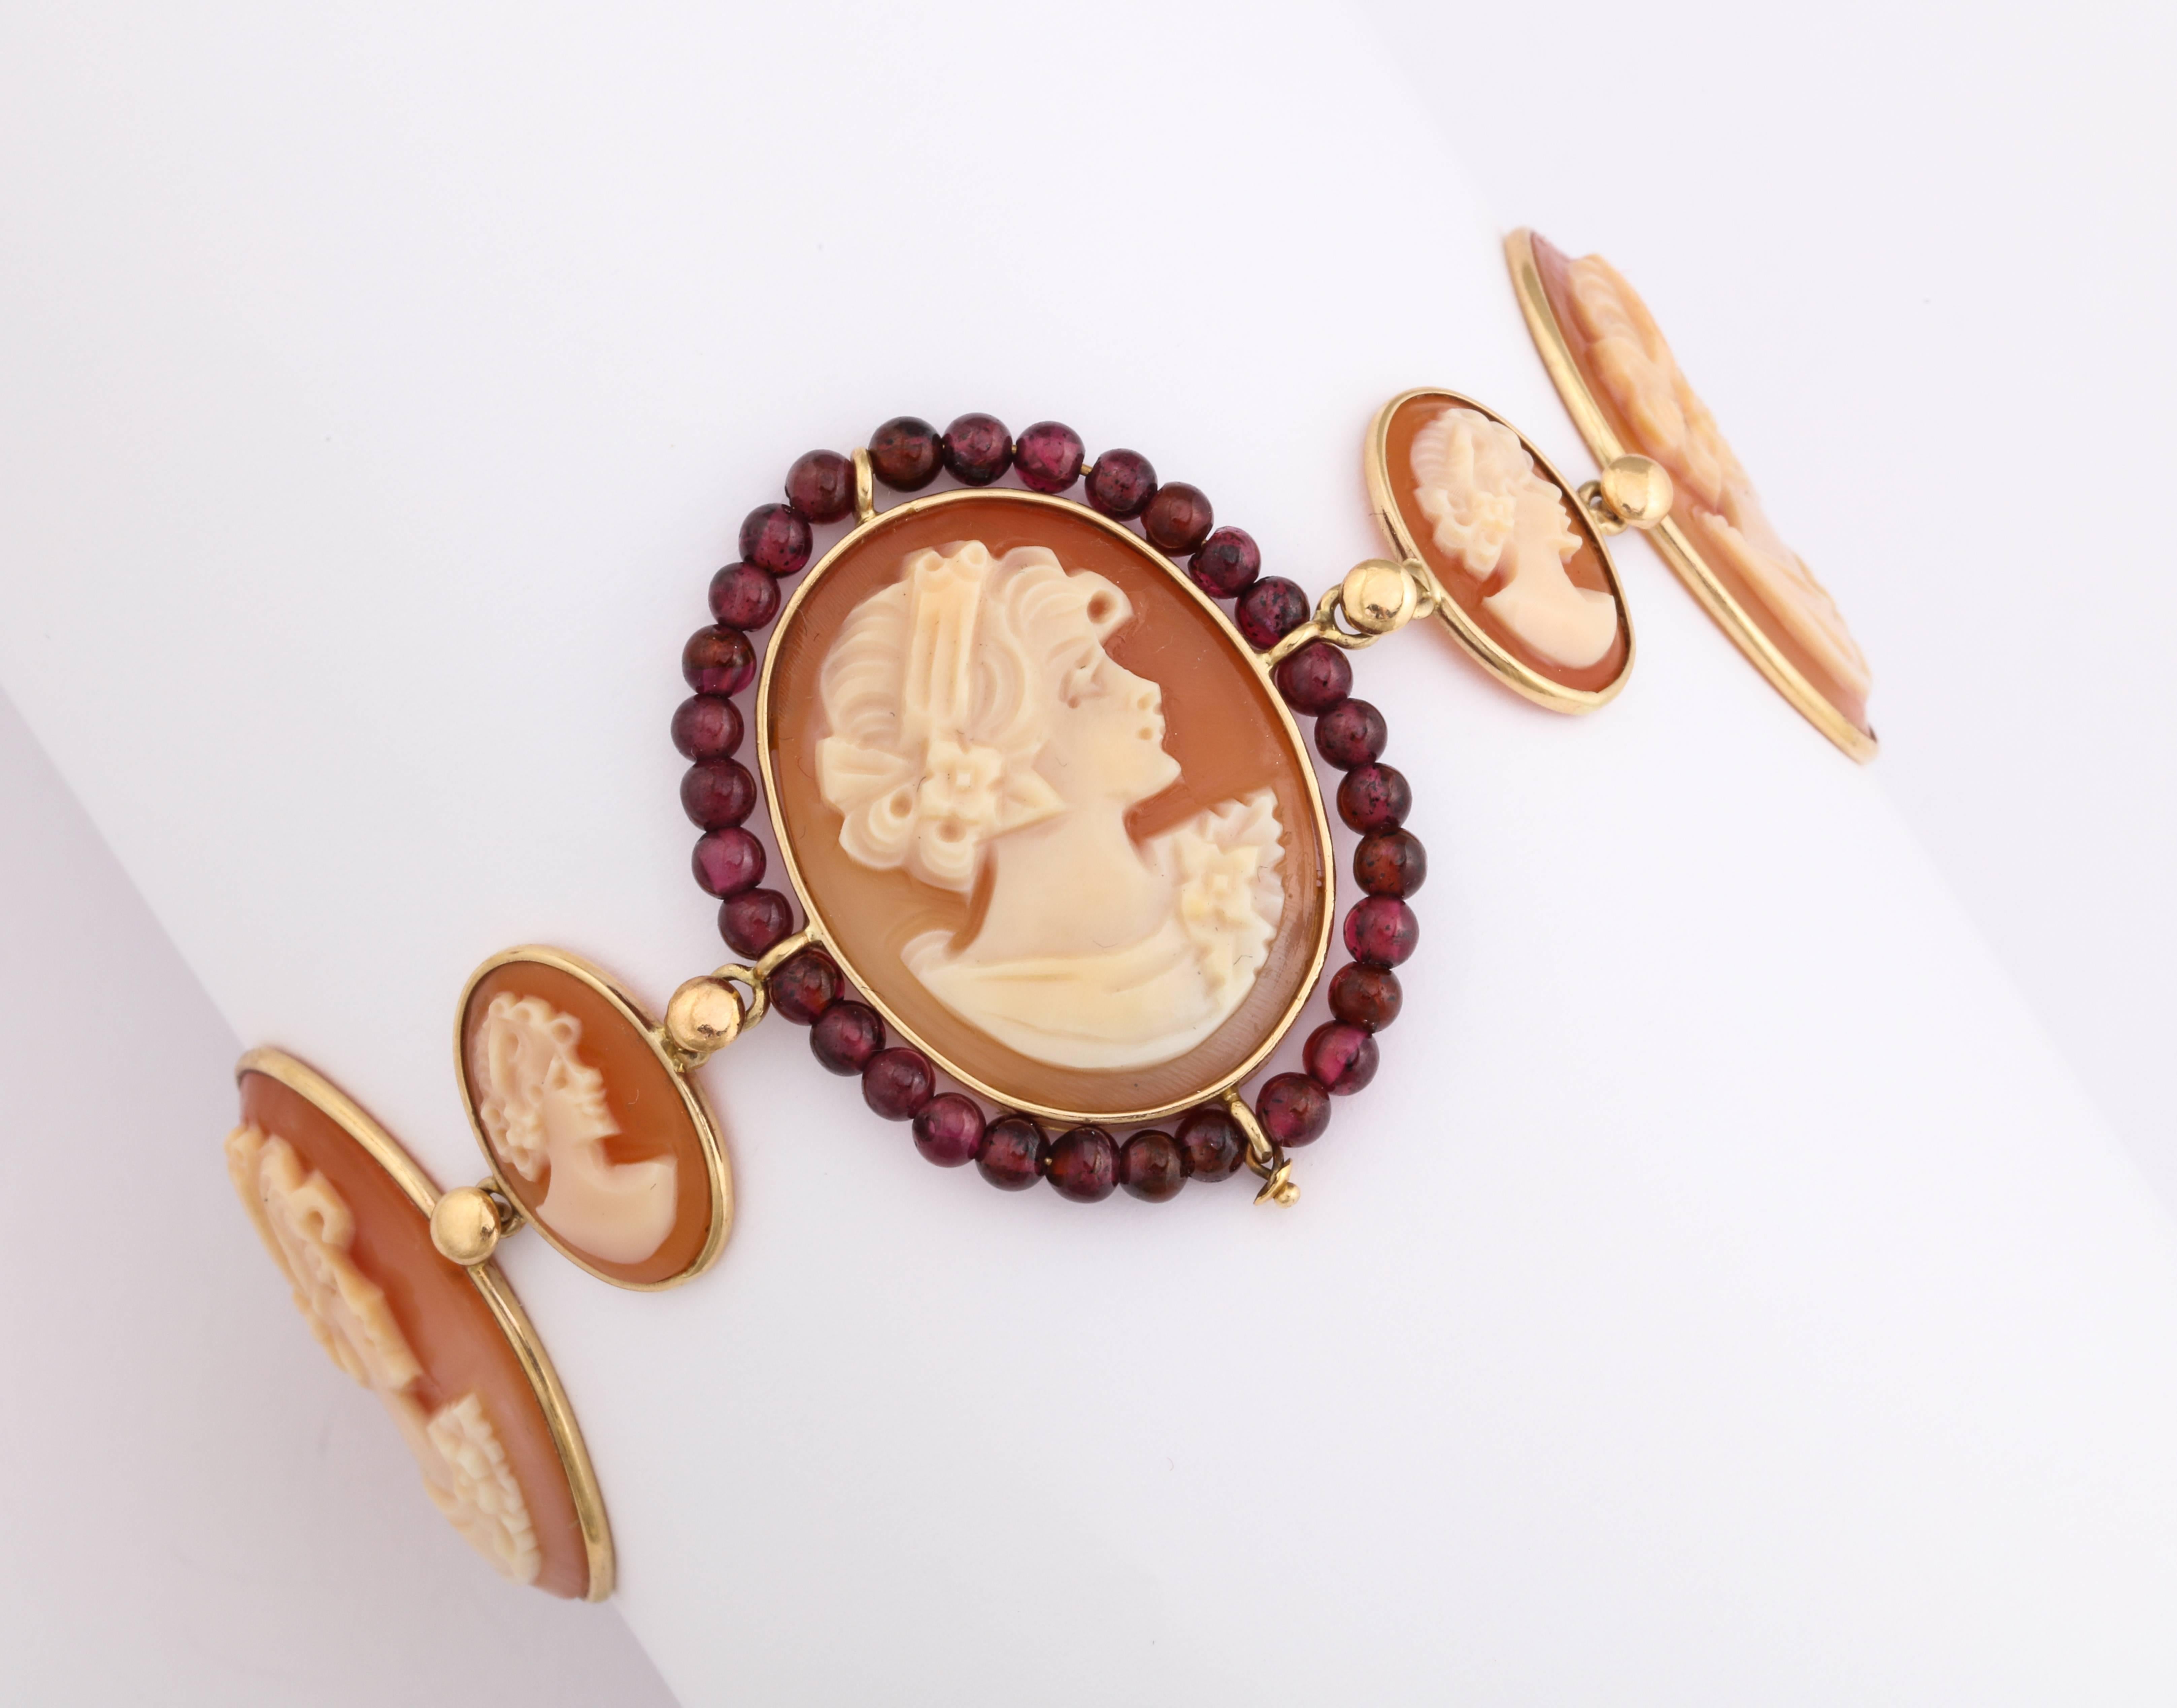 Hand carved cornelian shell cameos set in 14kt gold bracelet with garnet beads.